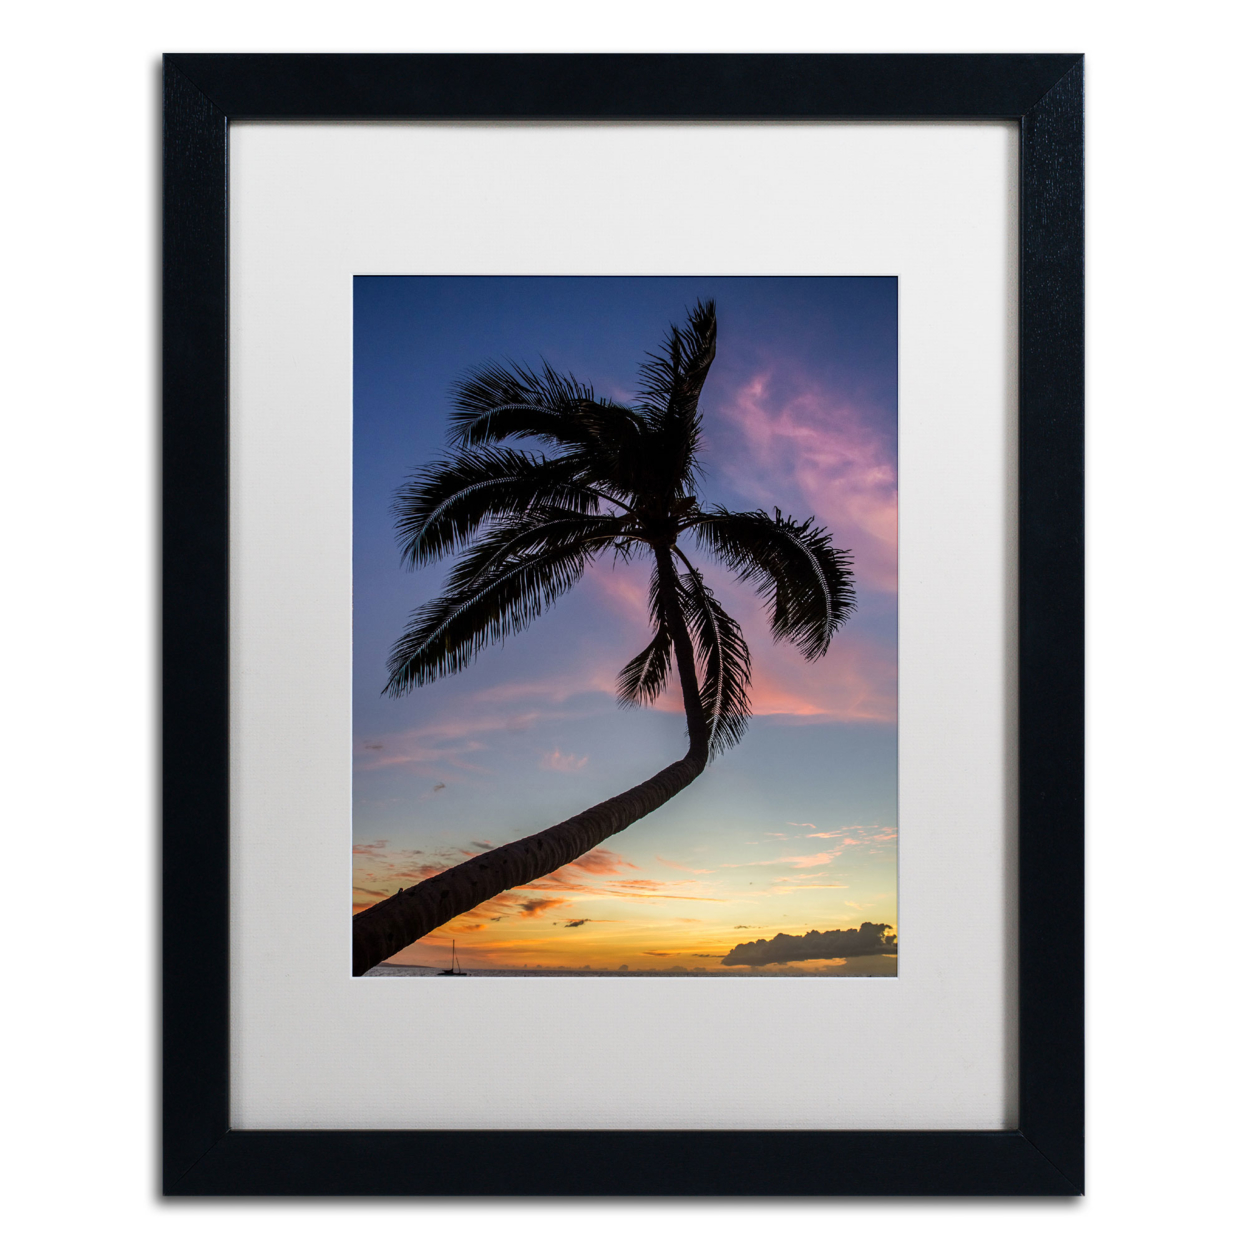 Pierre Leclerc 'Sunset Palm' Black Wooden Framed Art 18 X 22 Inches